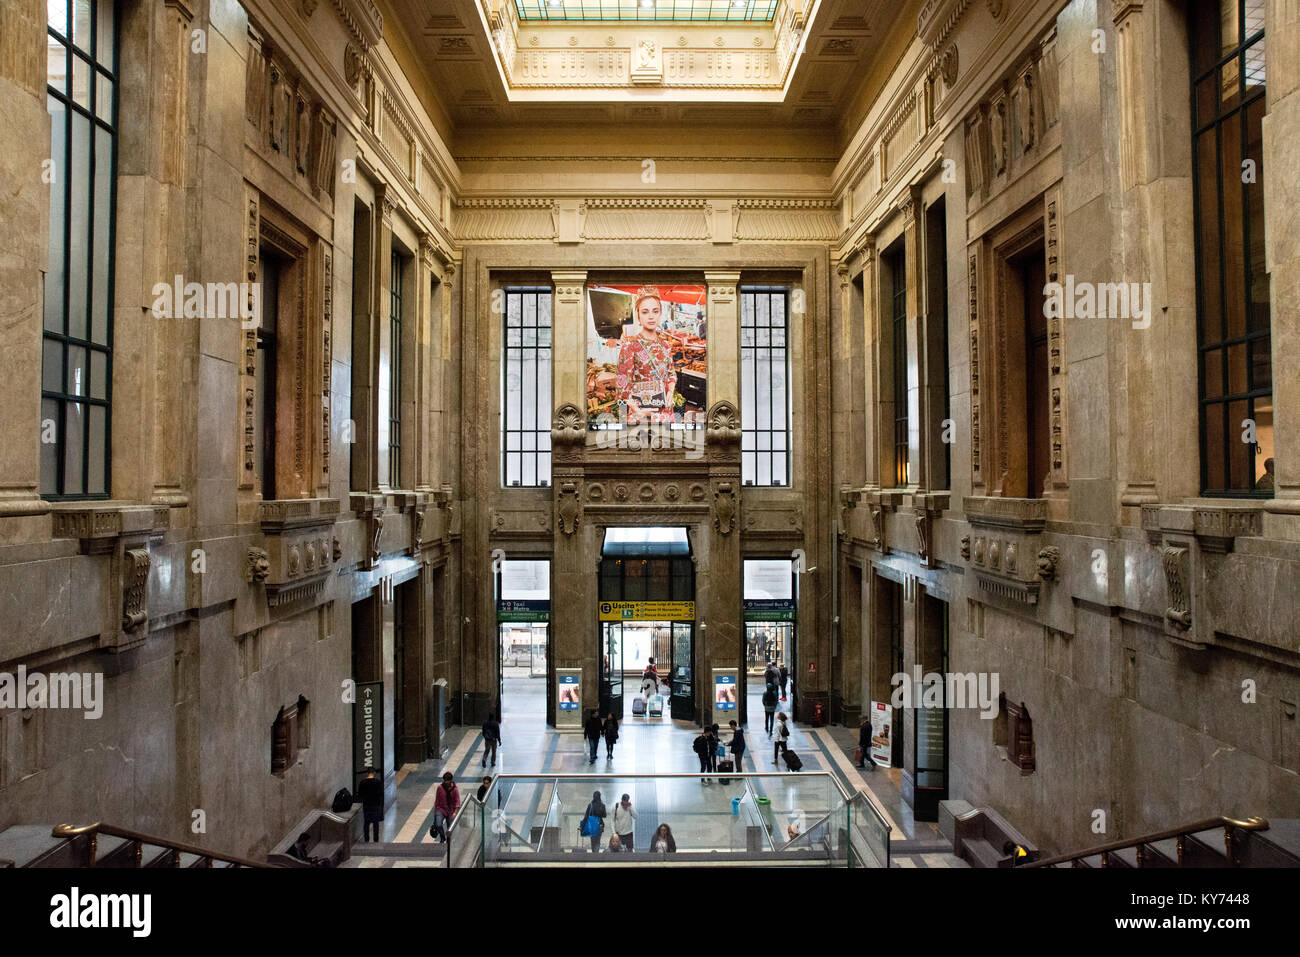 Passengers and architecture in Milan Central Station (Milano Centrale)  interior view, Milan, Italy Stock Photo - Alamy